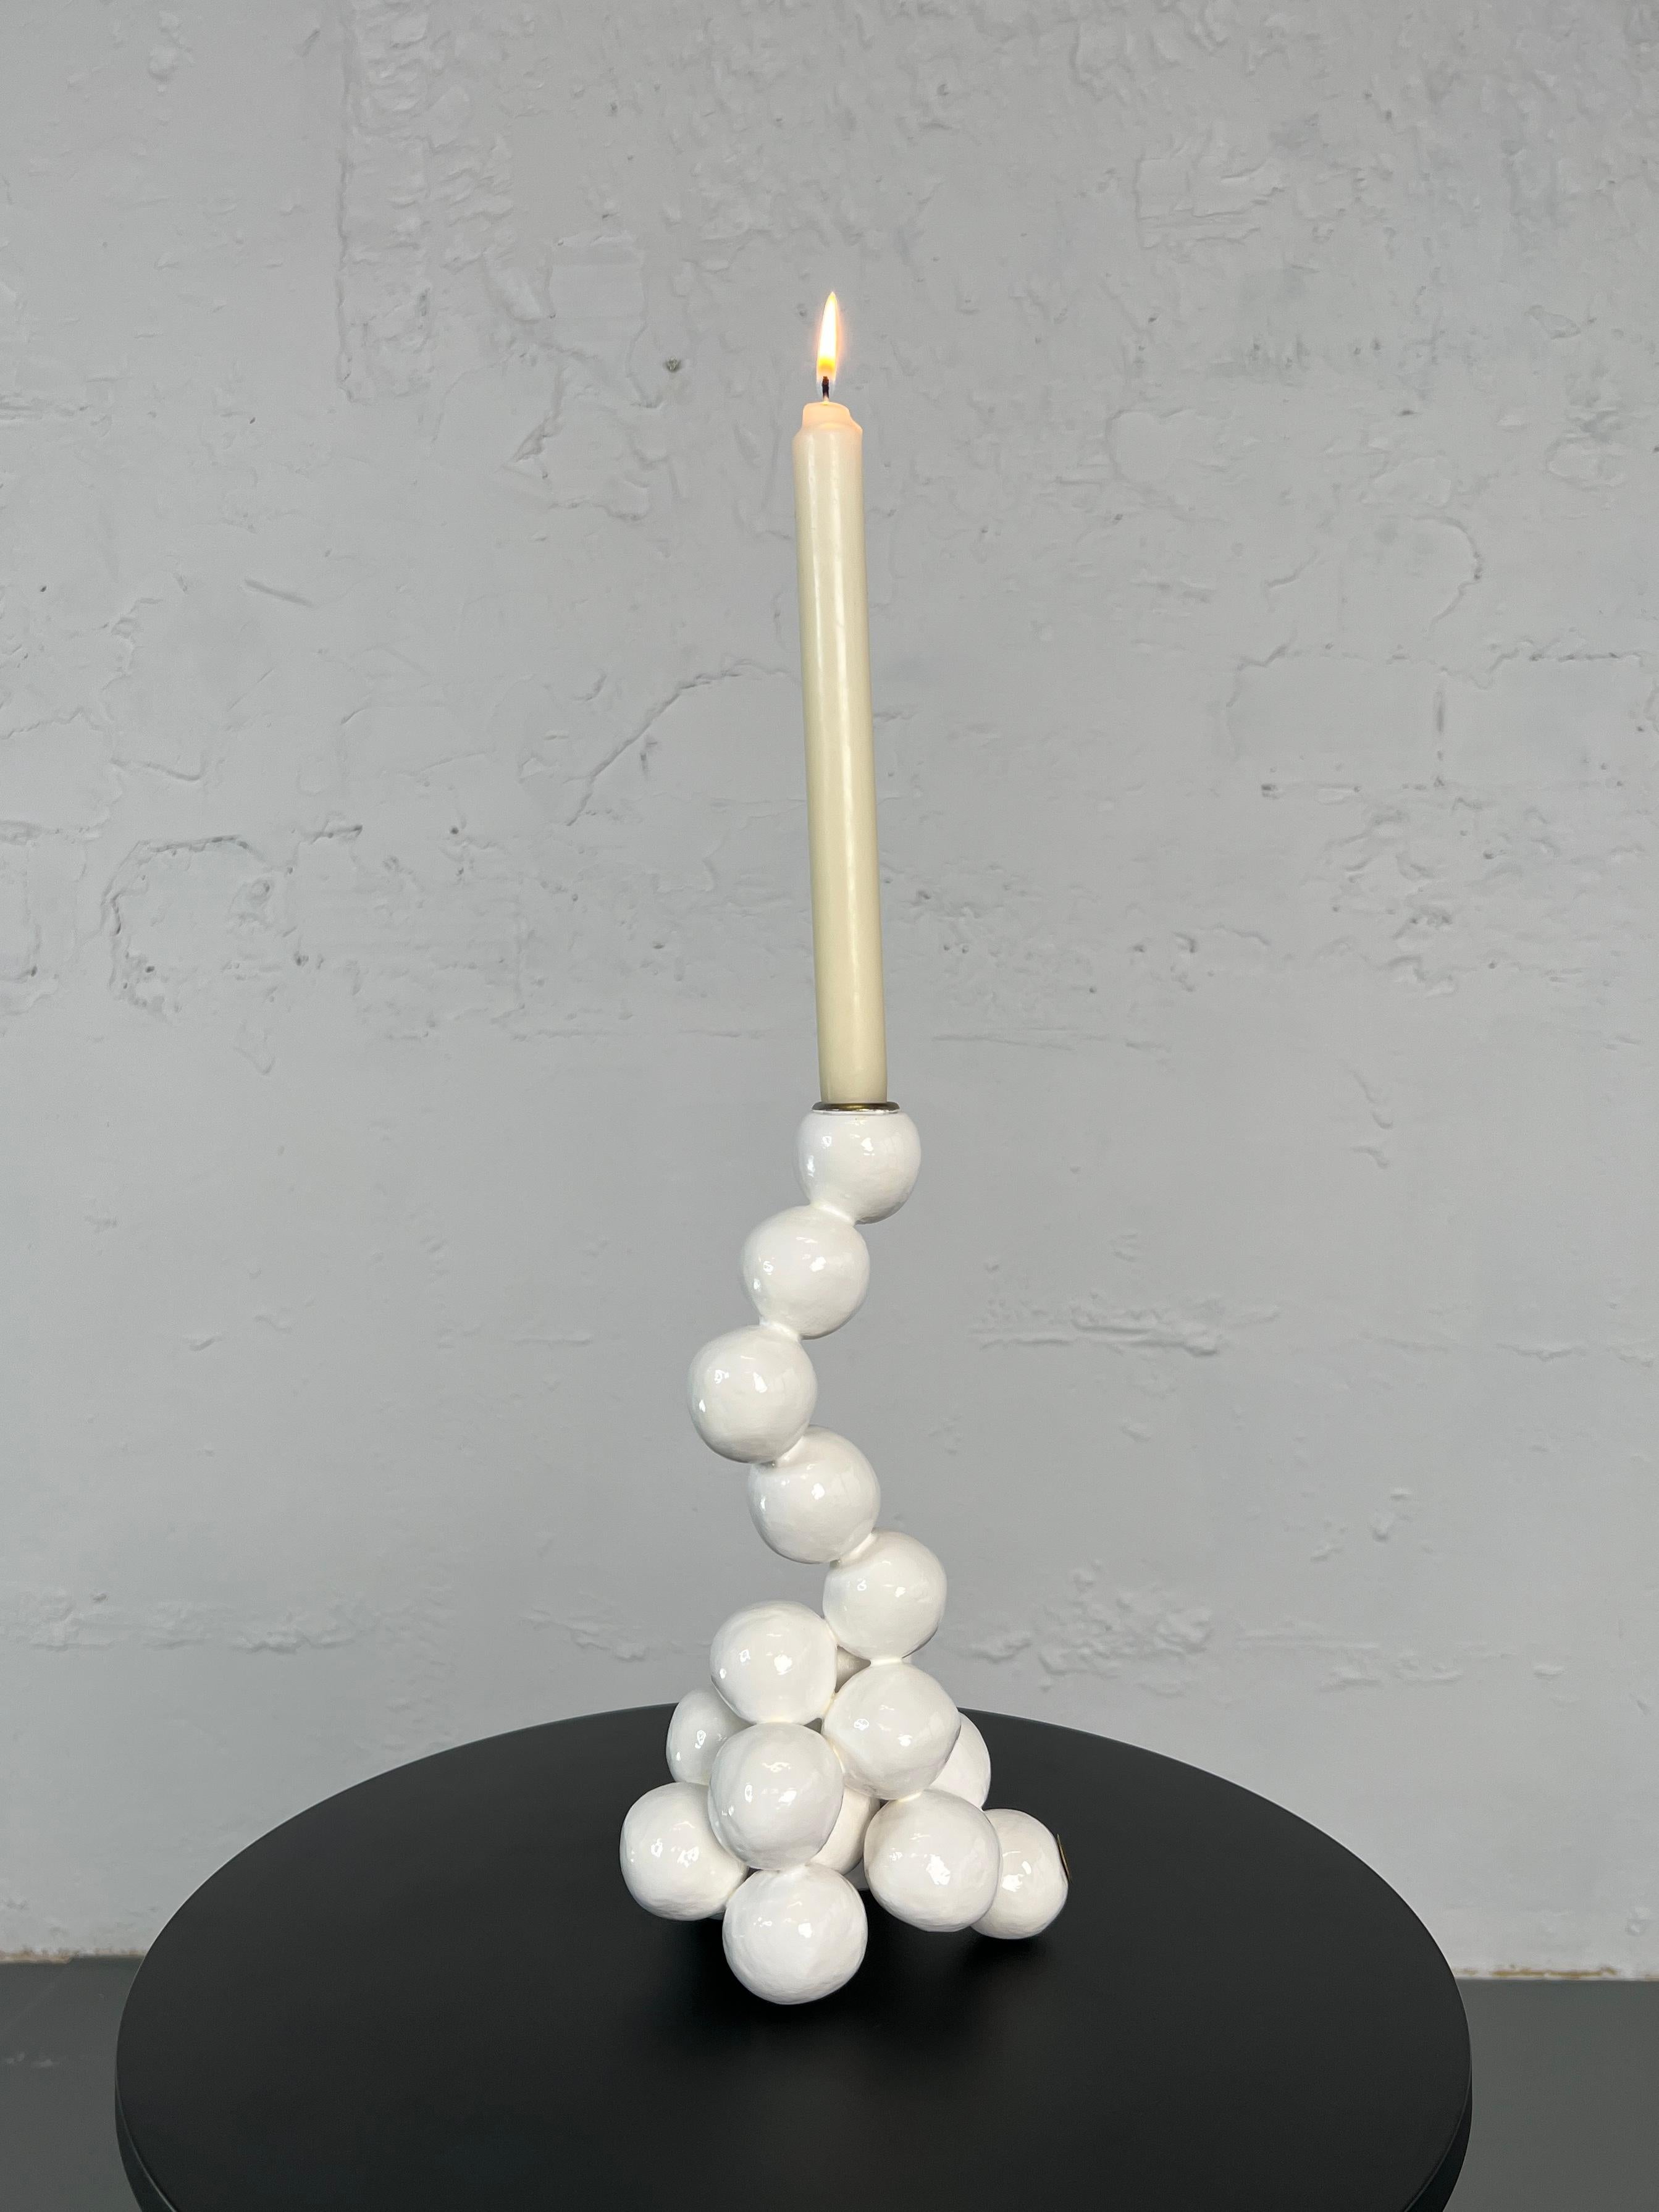 IRENA TONE Abstract Sculpture - Arty White Candleholder "Pearls" for 1 Candle Sphere Original Sculpture